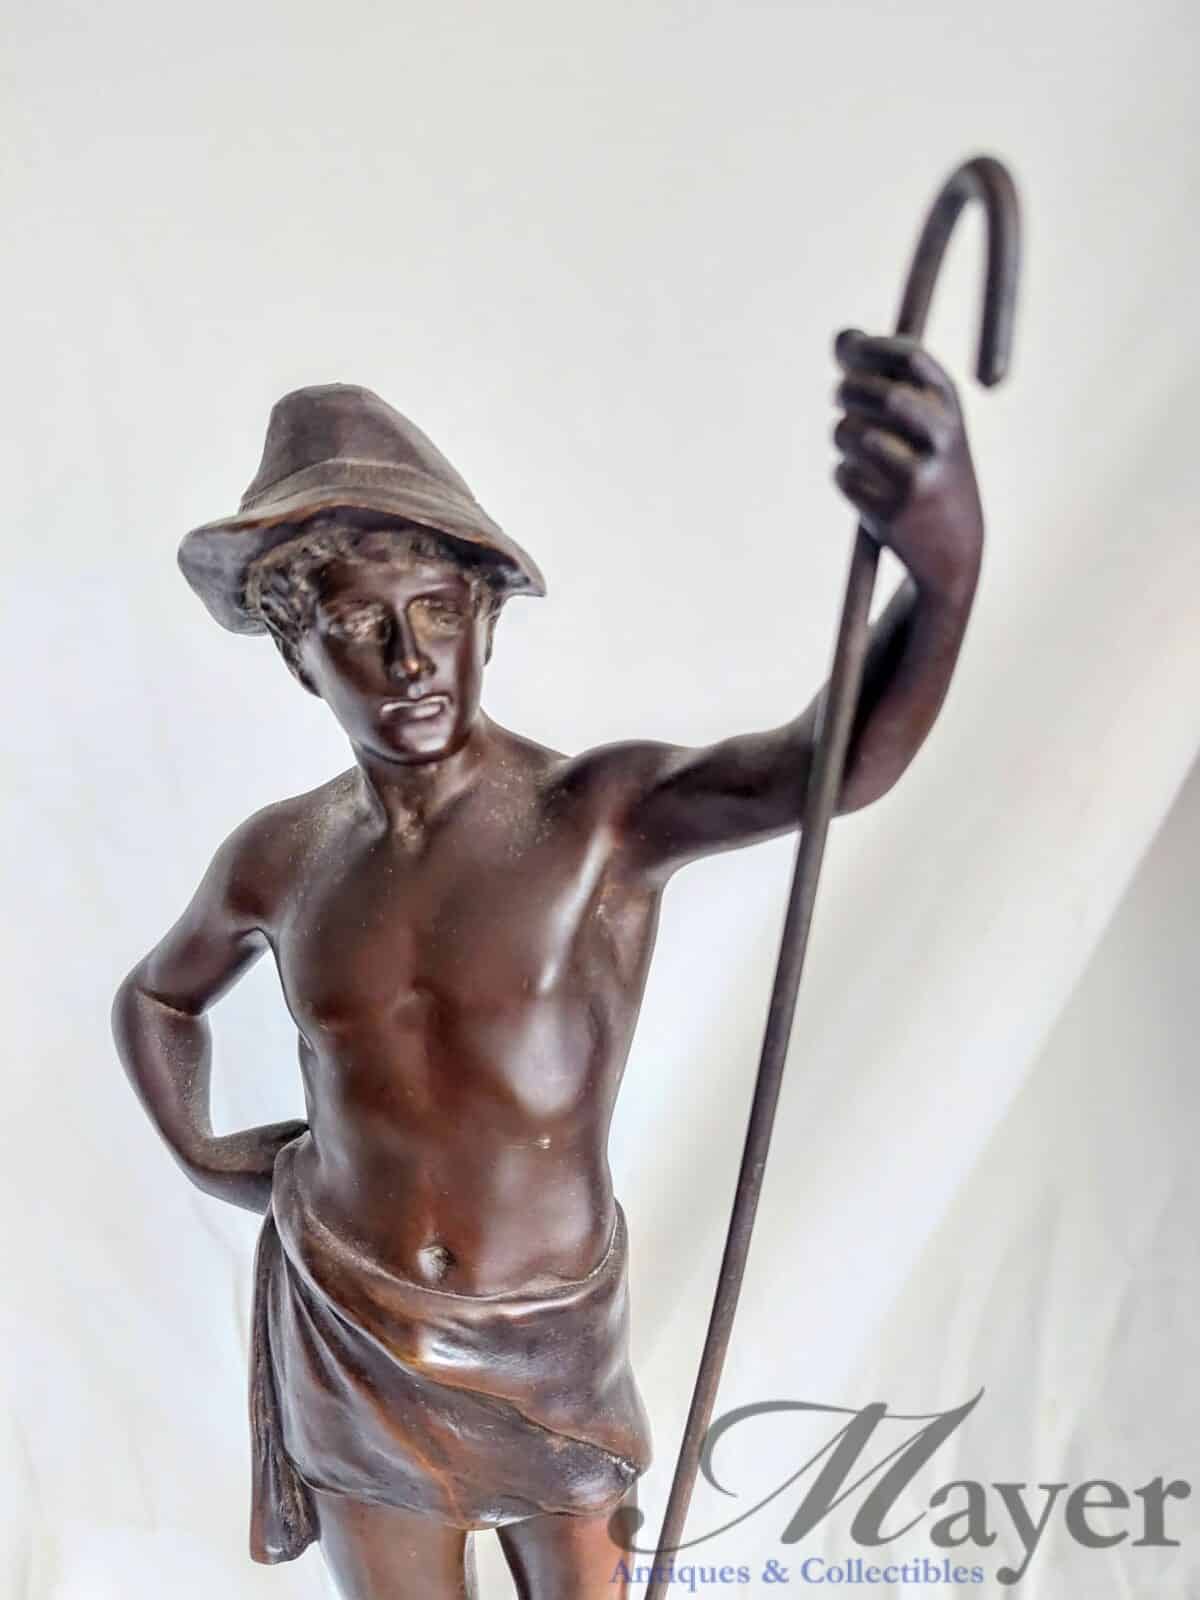 The shepherd boy (Le berger in French) by Raphael Hubert, a dark brownish patinated bronze sculpture from around the 1920's. 